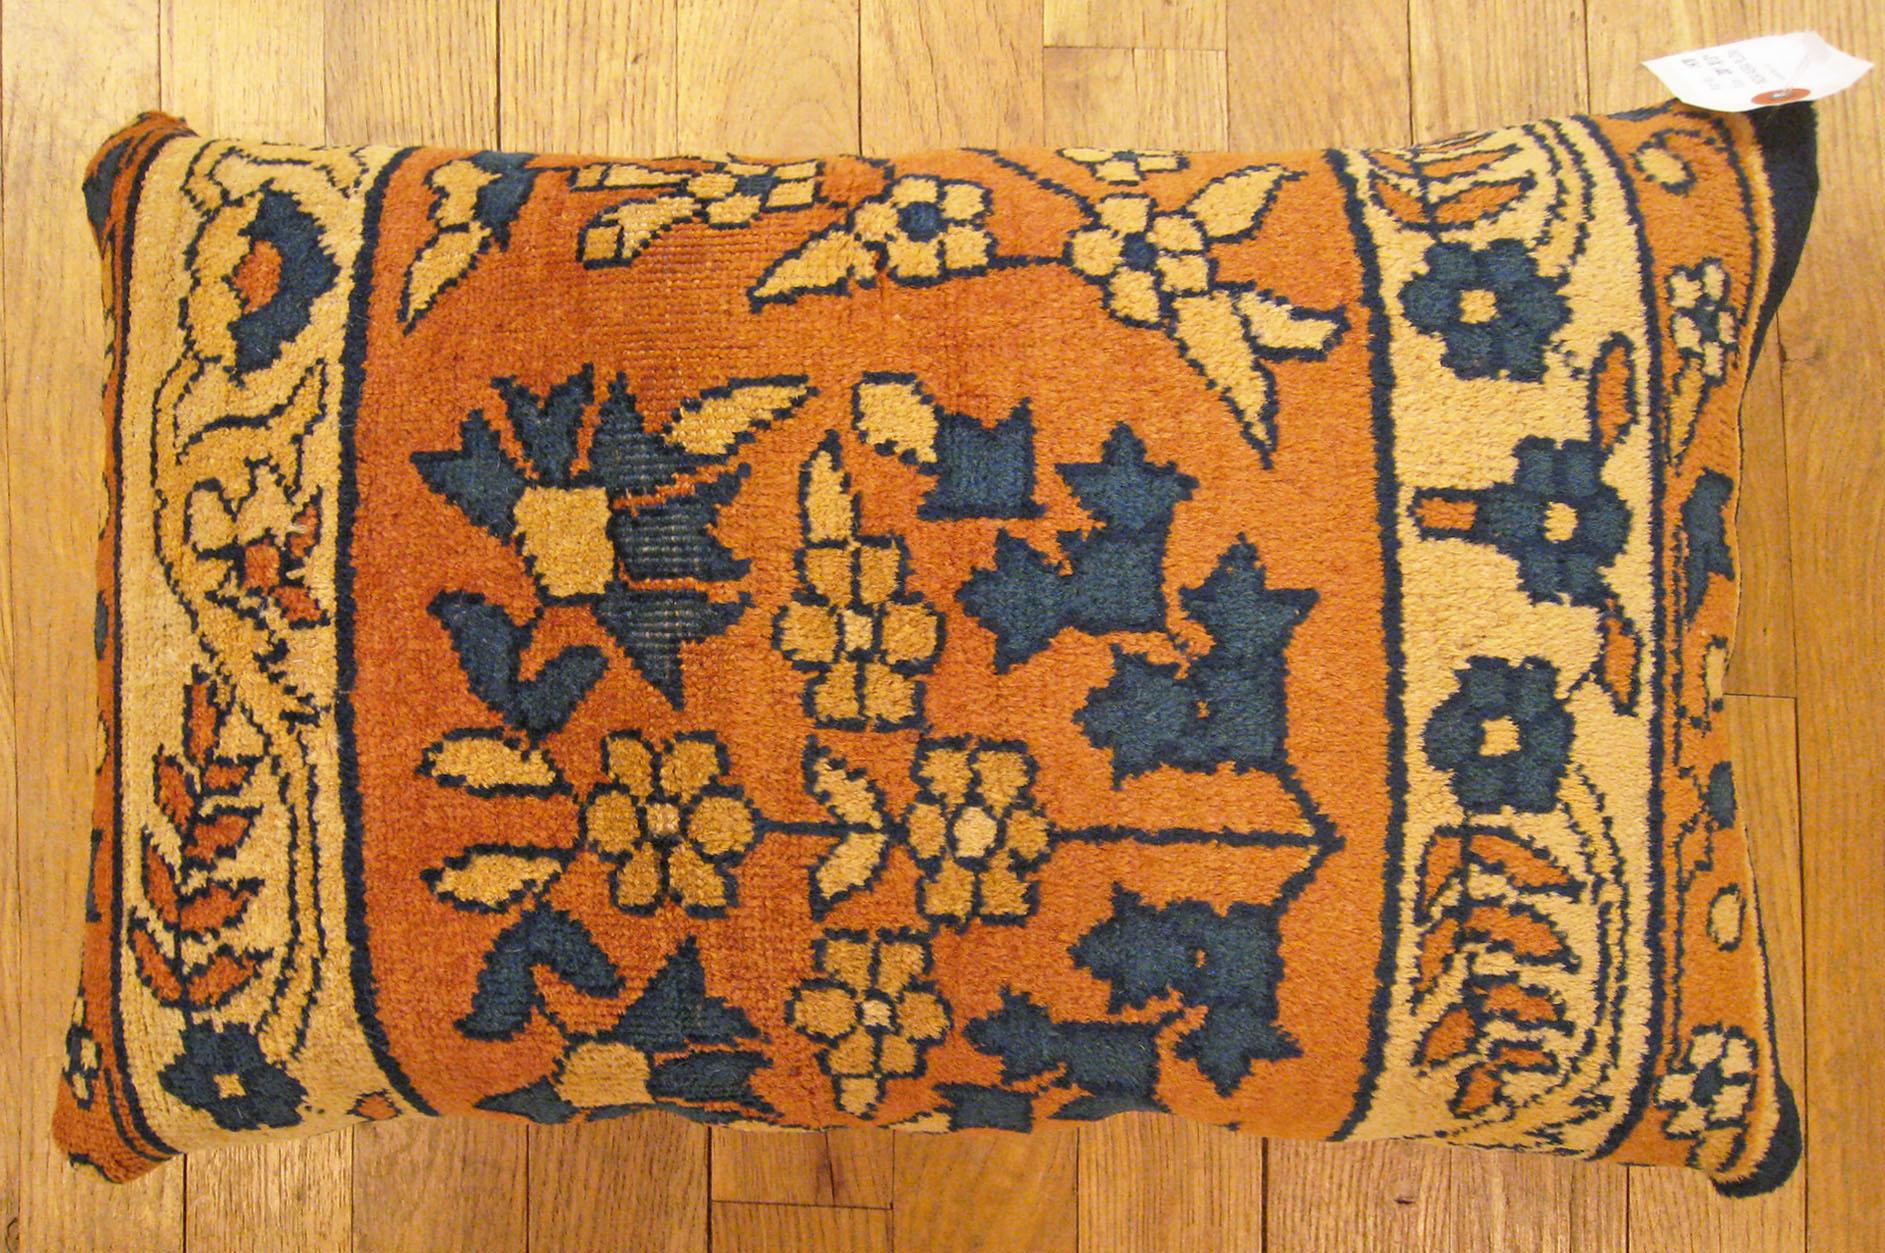 Antique Indian Agra Rug Pillow; size 1'8” x 1'1”.

An antique decorative pillow with floral elements allover a salmon central field, size 1'8” x 1'1”. This lovely decorative pillow features an antique fabric of a Agra rug on front which is